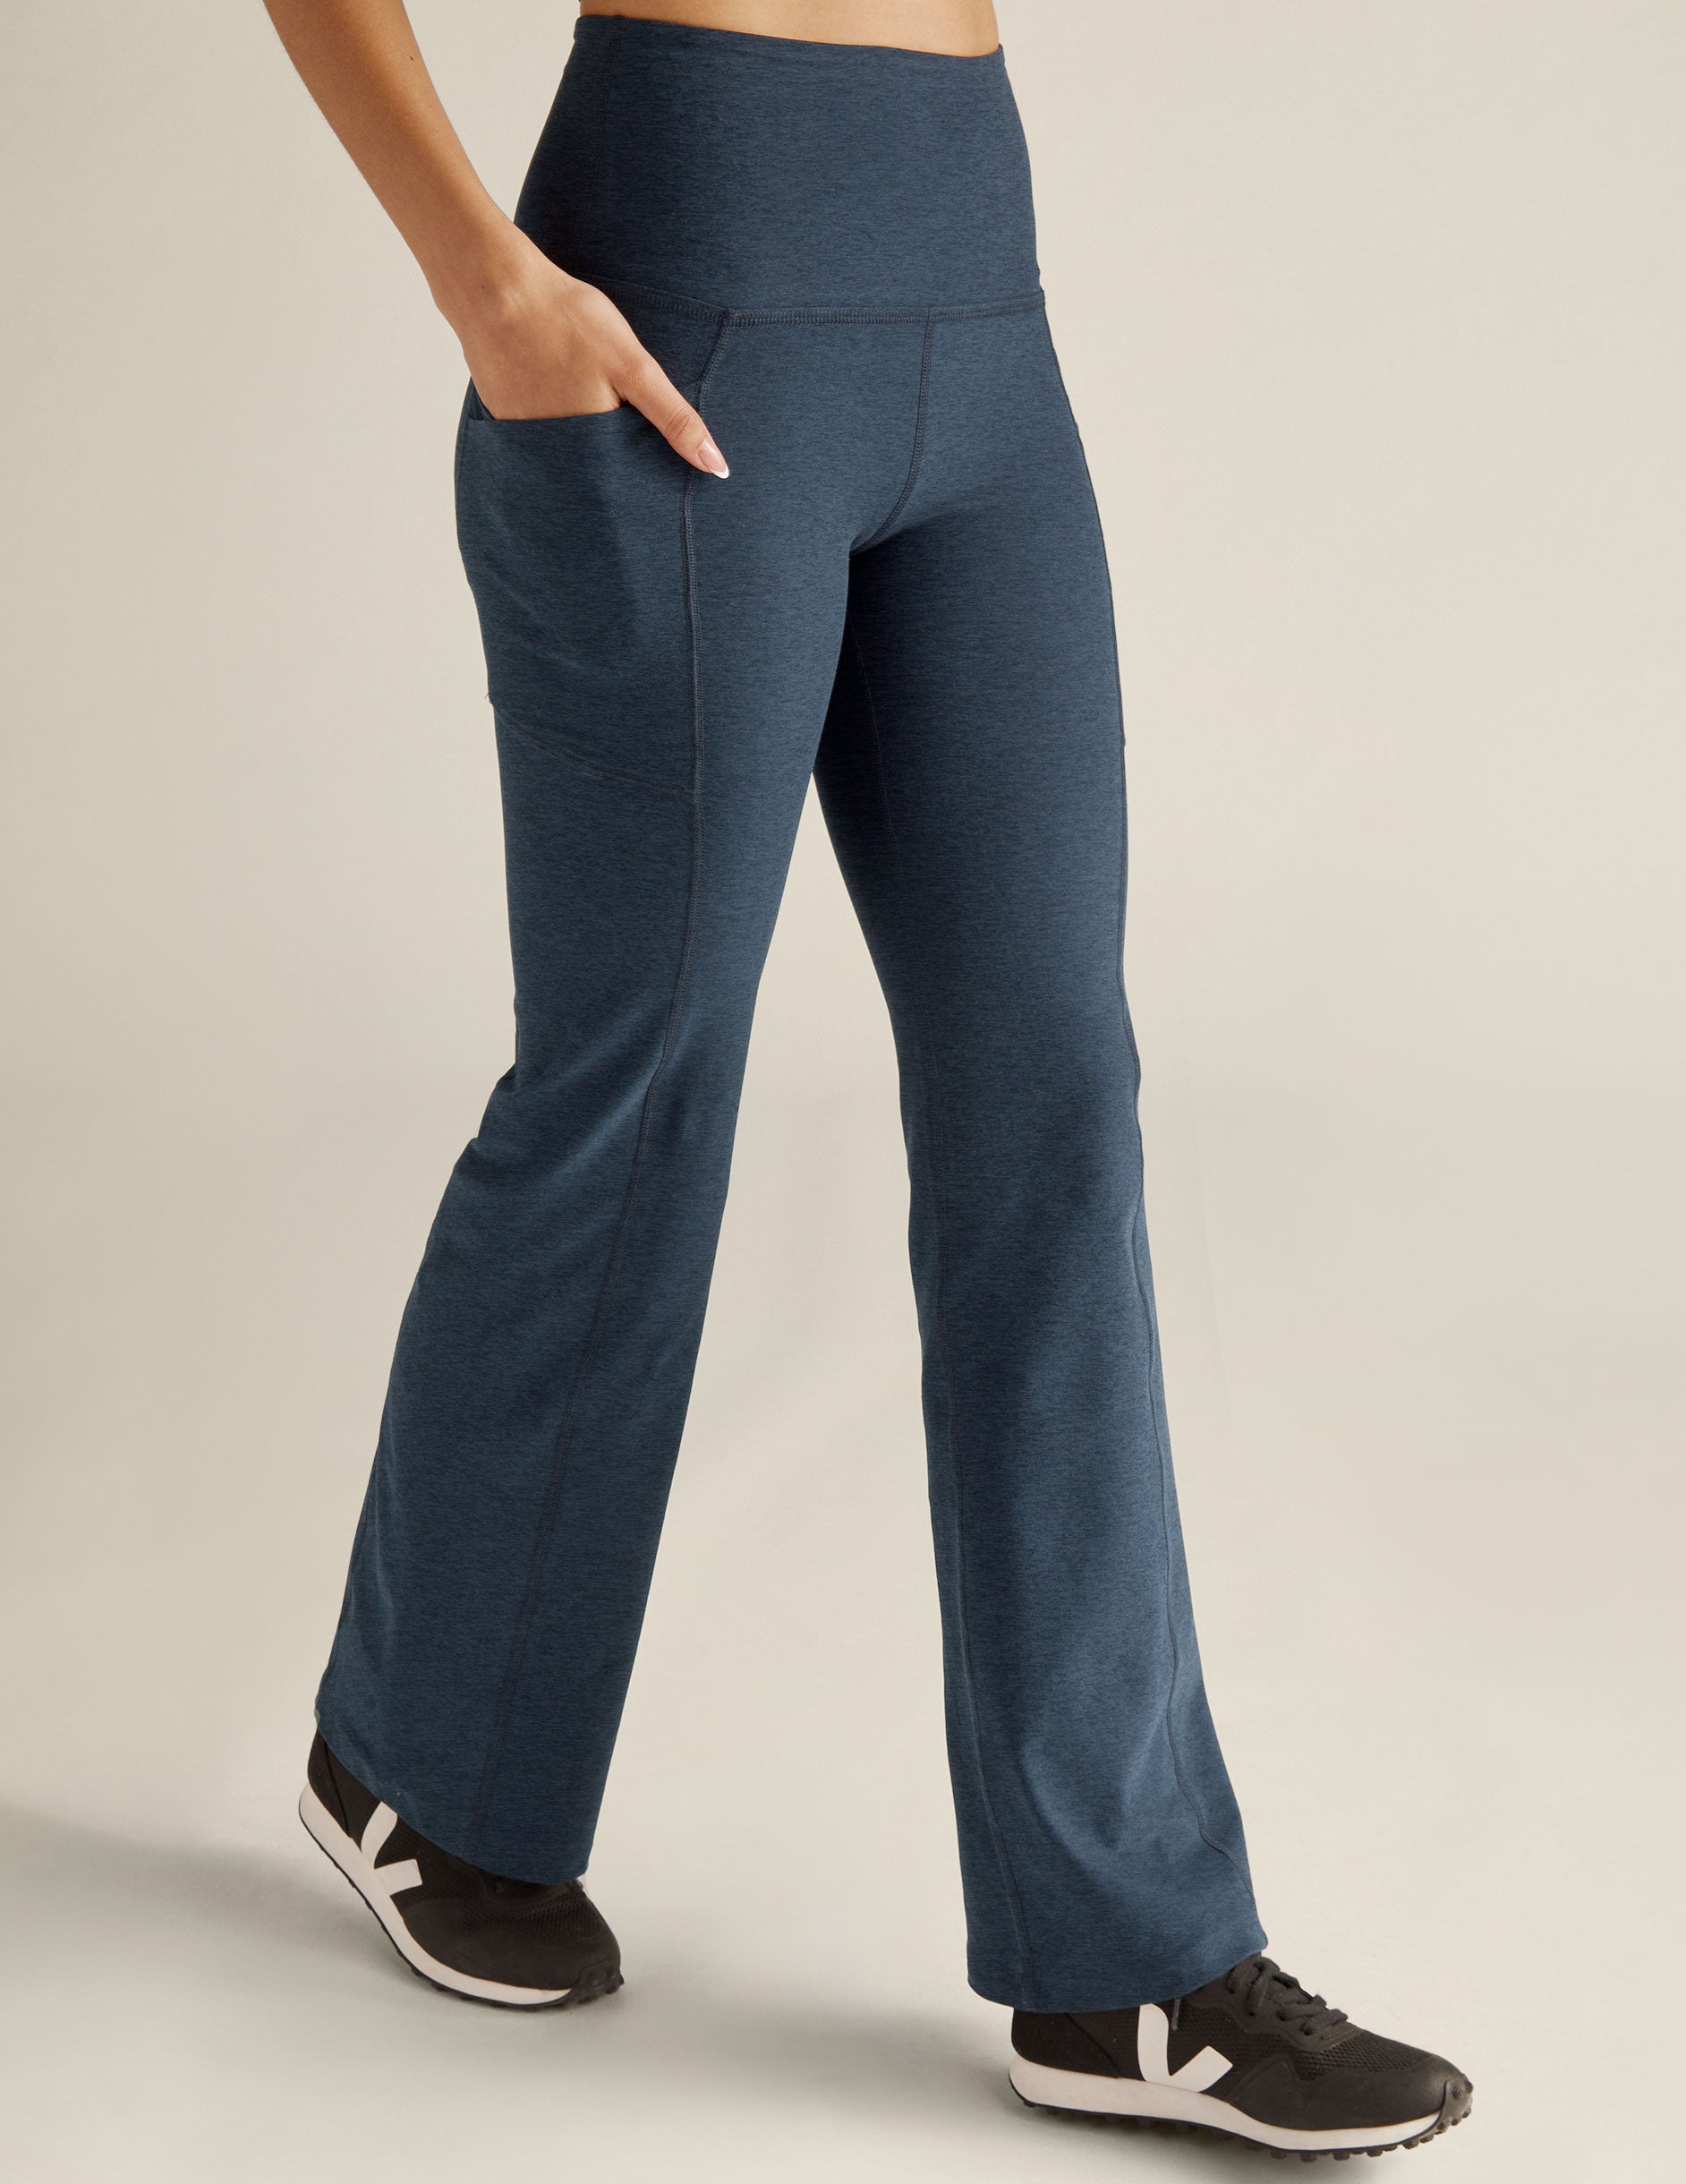 FIRST WAY Buttery Soft Women's Bootcut Yoga India